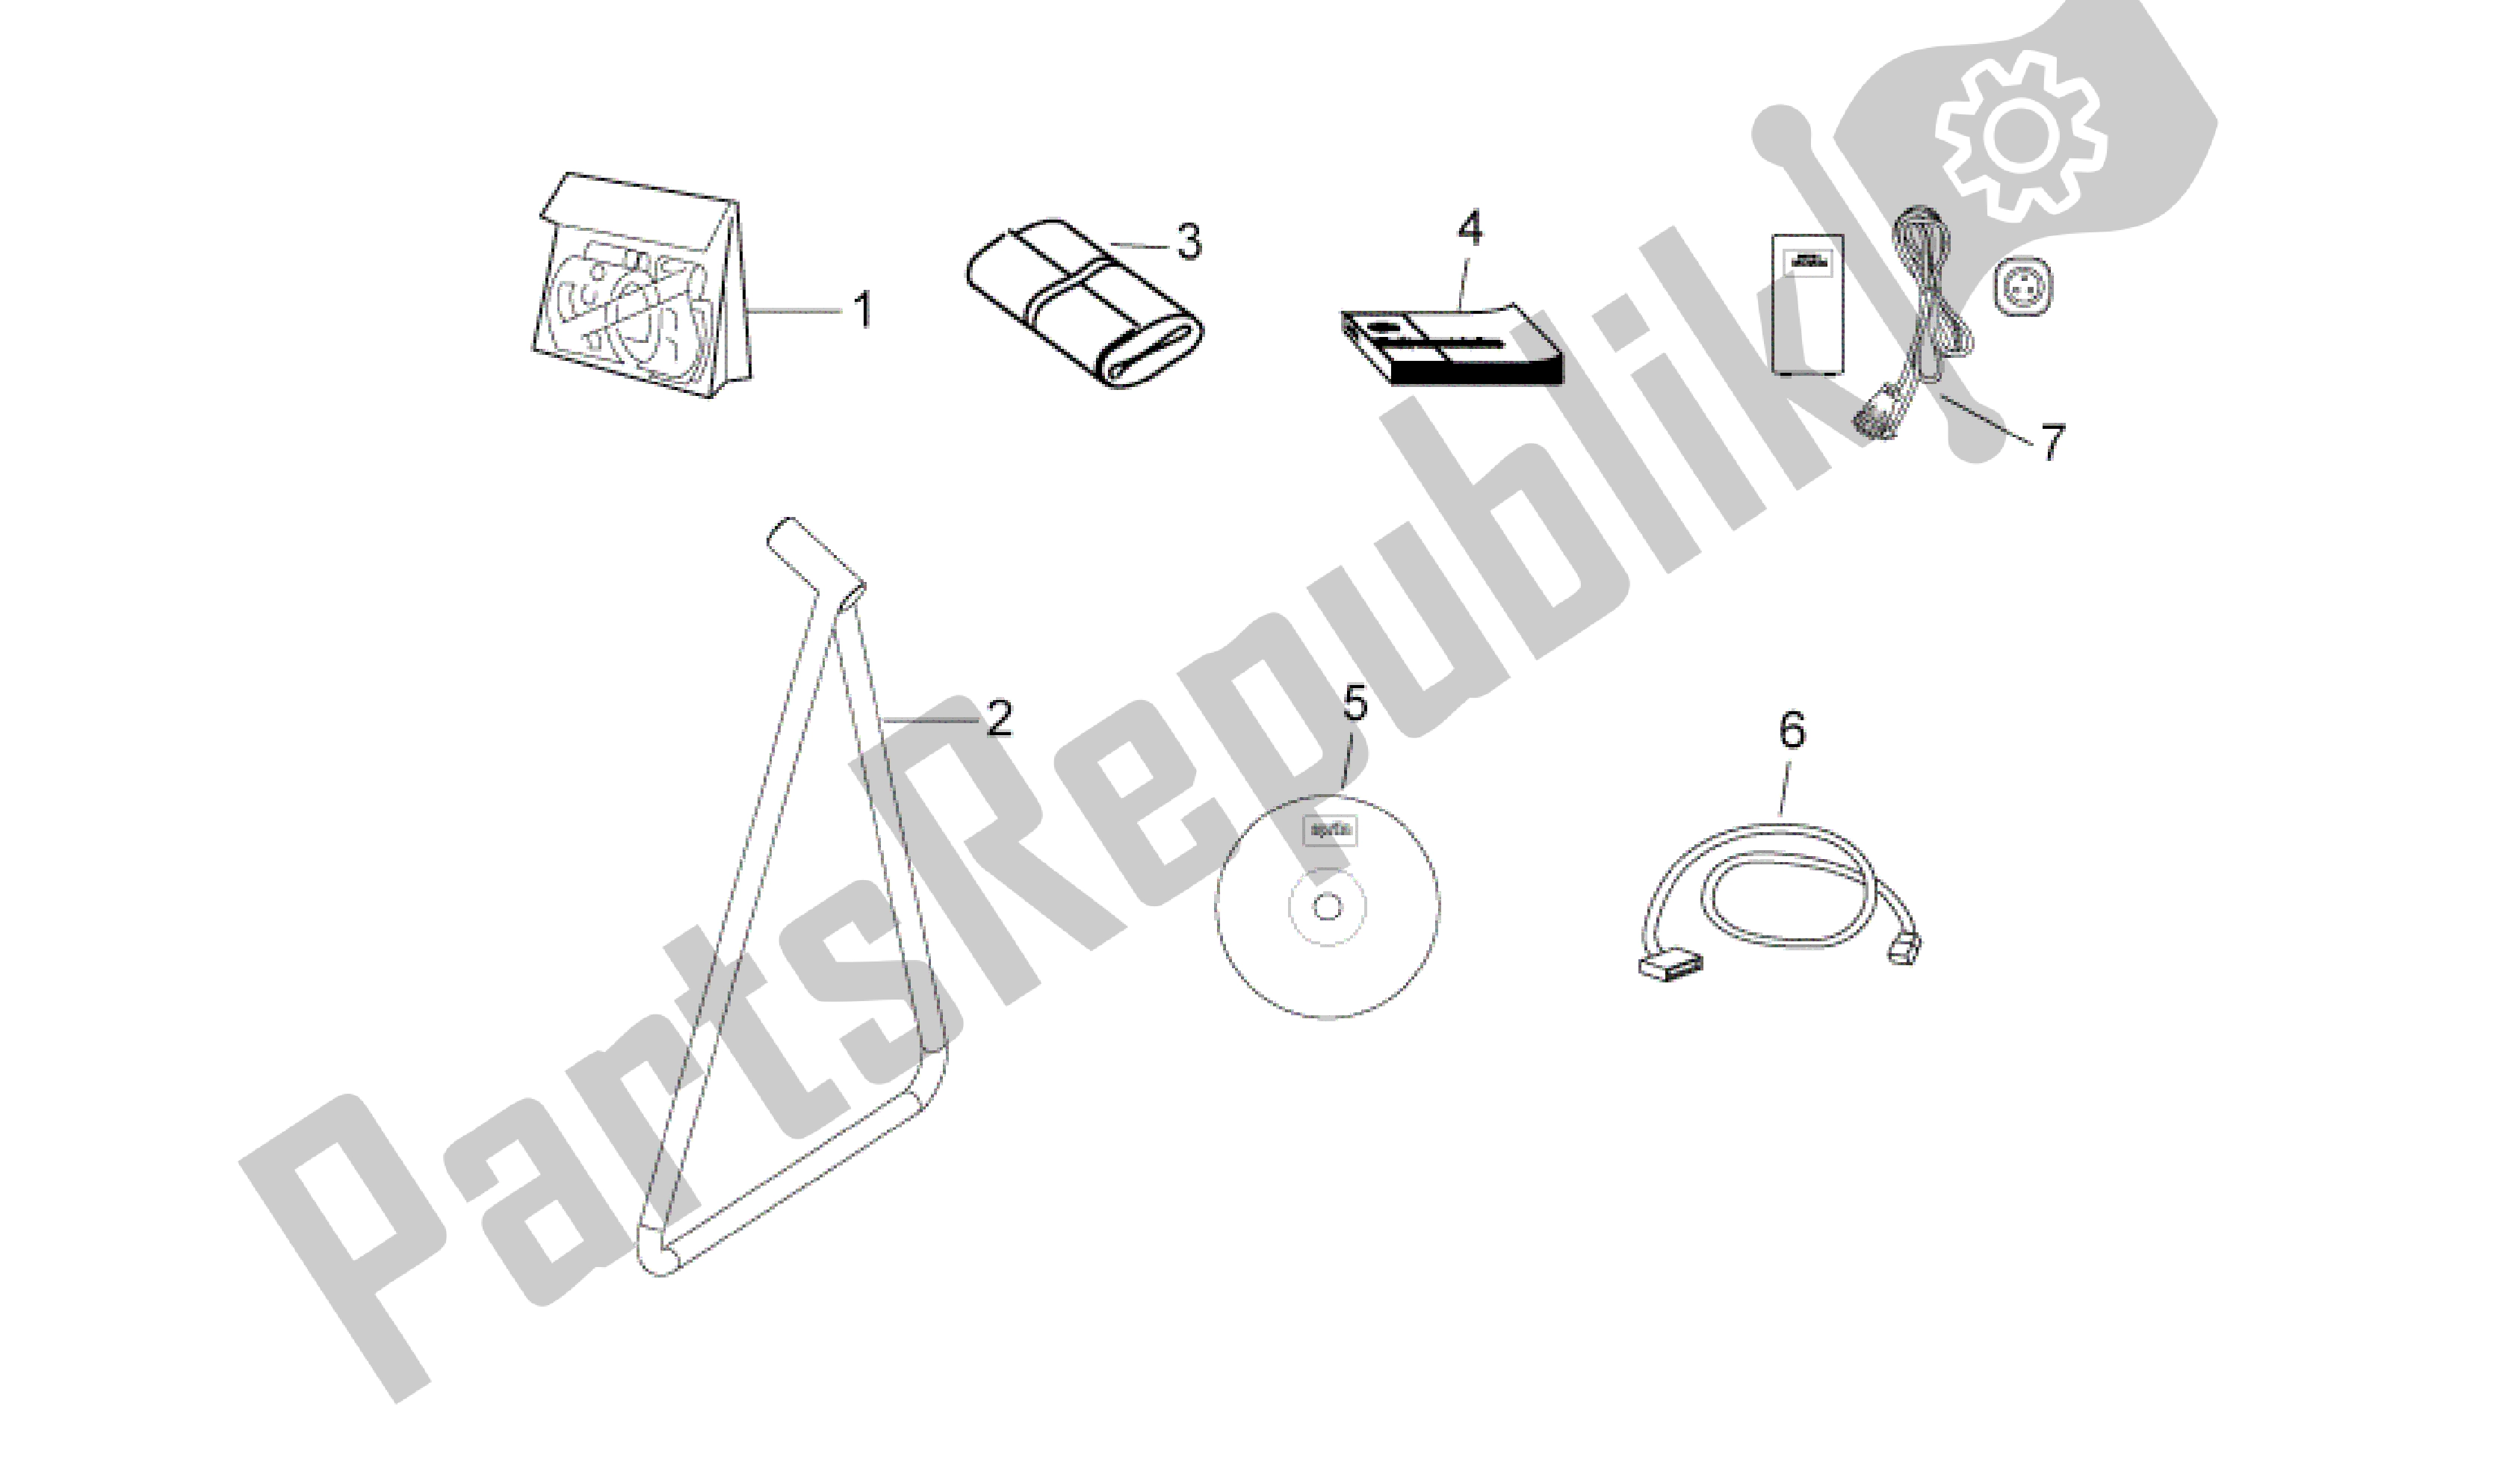 All parts for the Completing Part of the Aprilia MXV 450 2008 - 2010